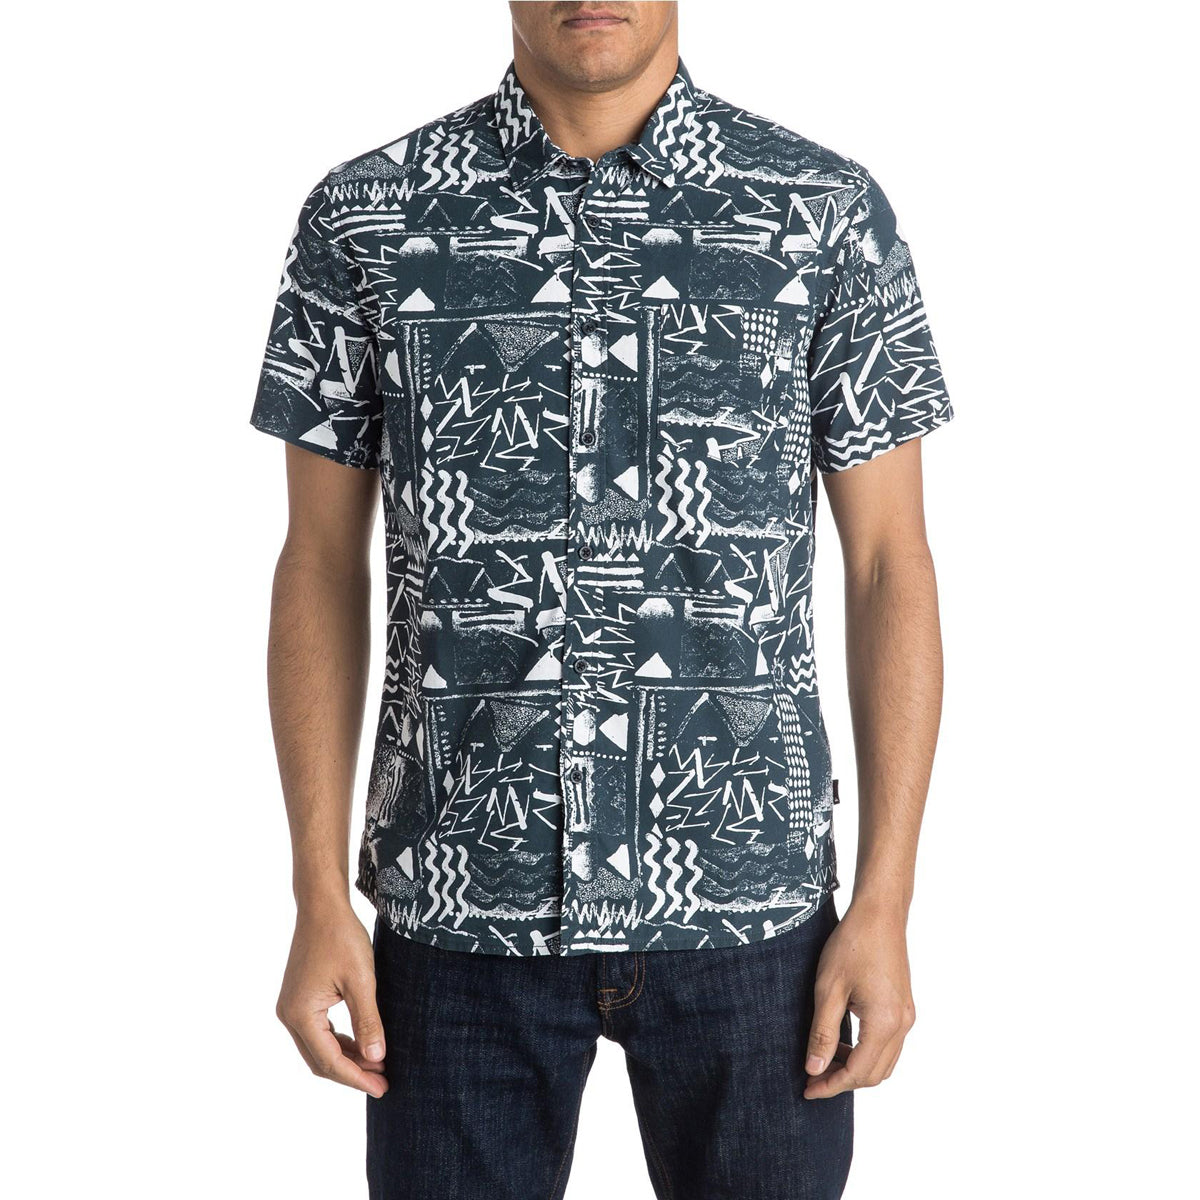 Quiksilver Labyrinth Men's Button Up Short-Sleeve Shirts - White